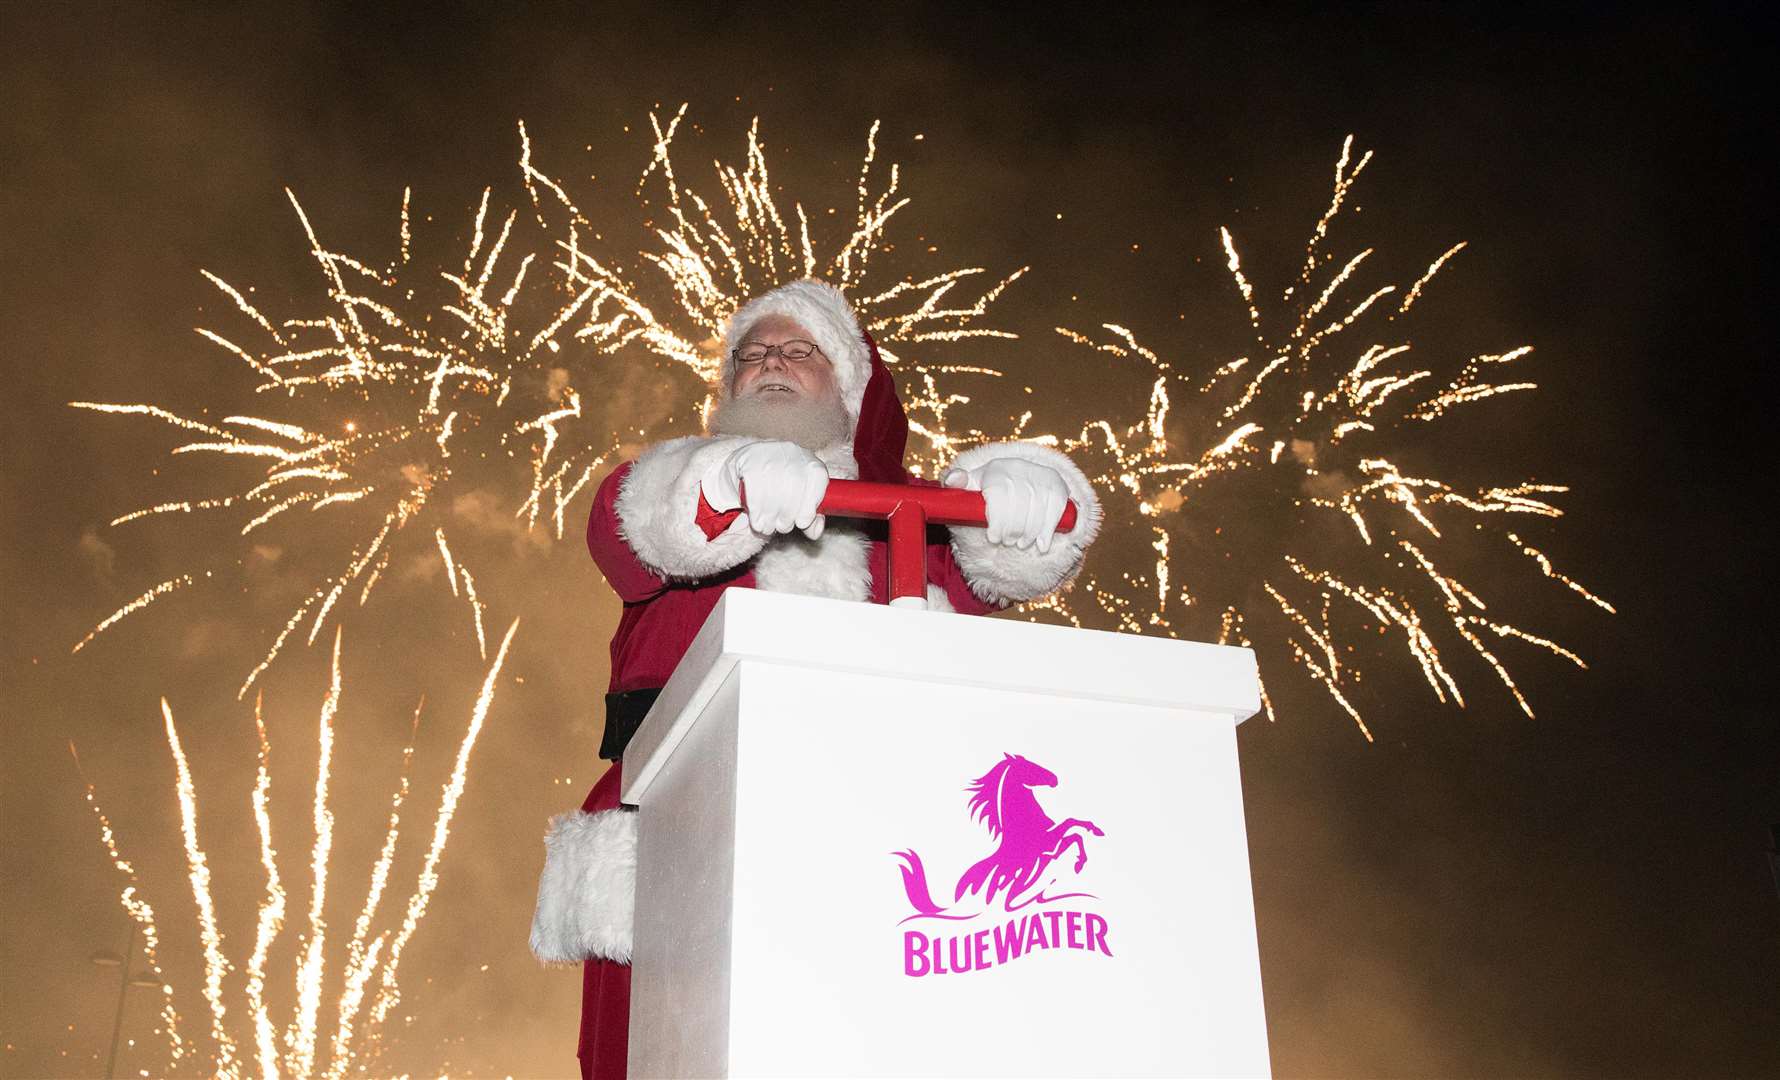 Bluewater's Light Night kicked off the festive countdown